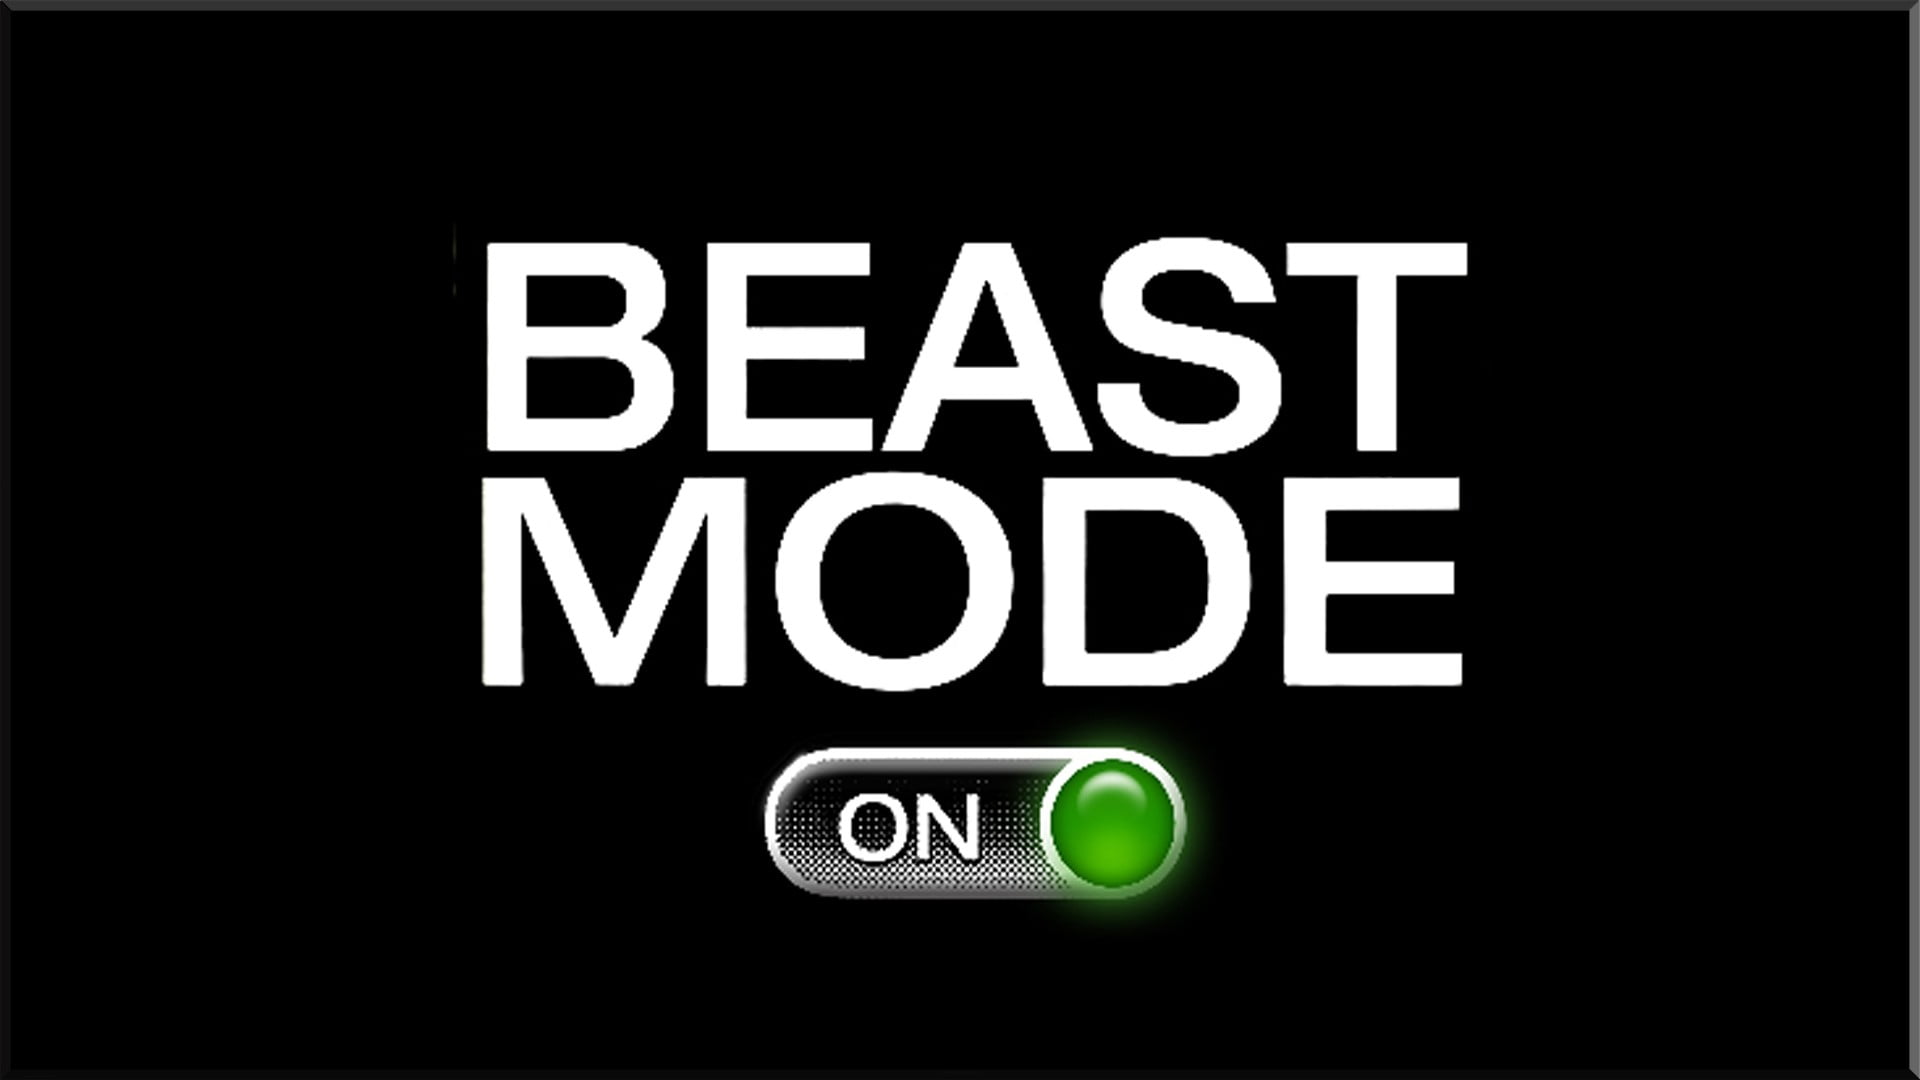 beast mode on text overlay with black background, black, simple background, typography, minimalism